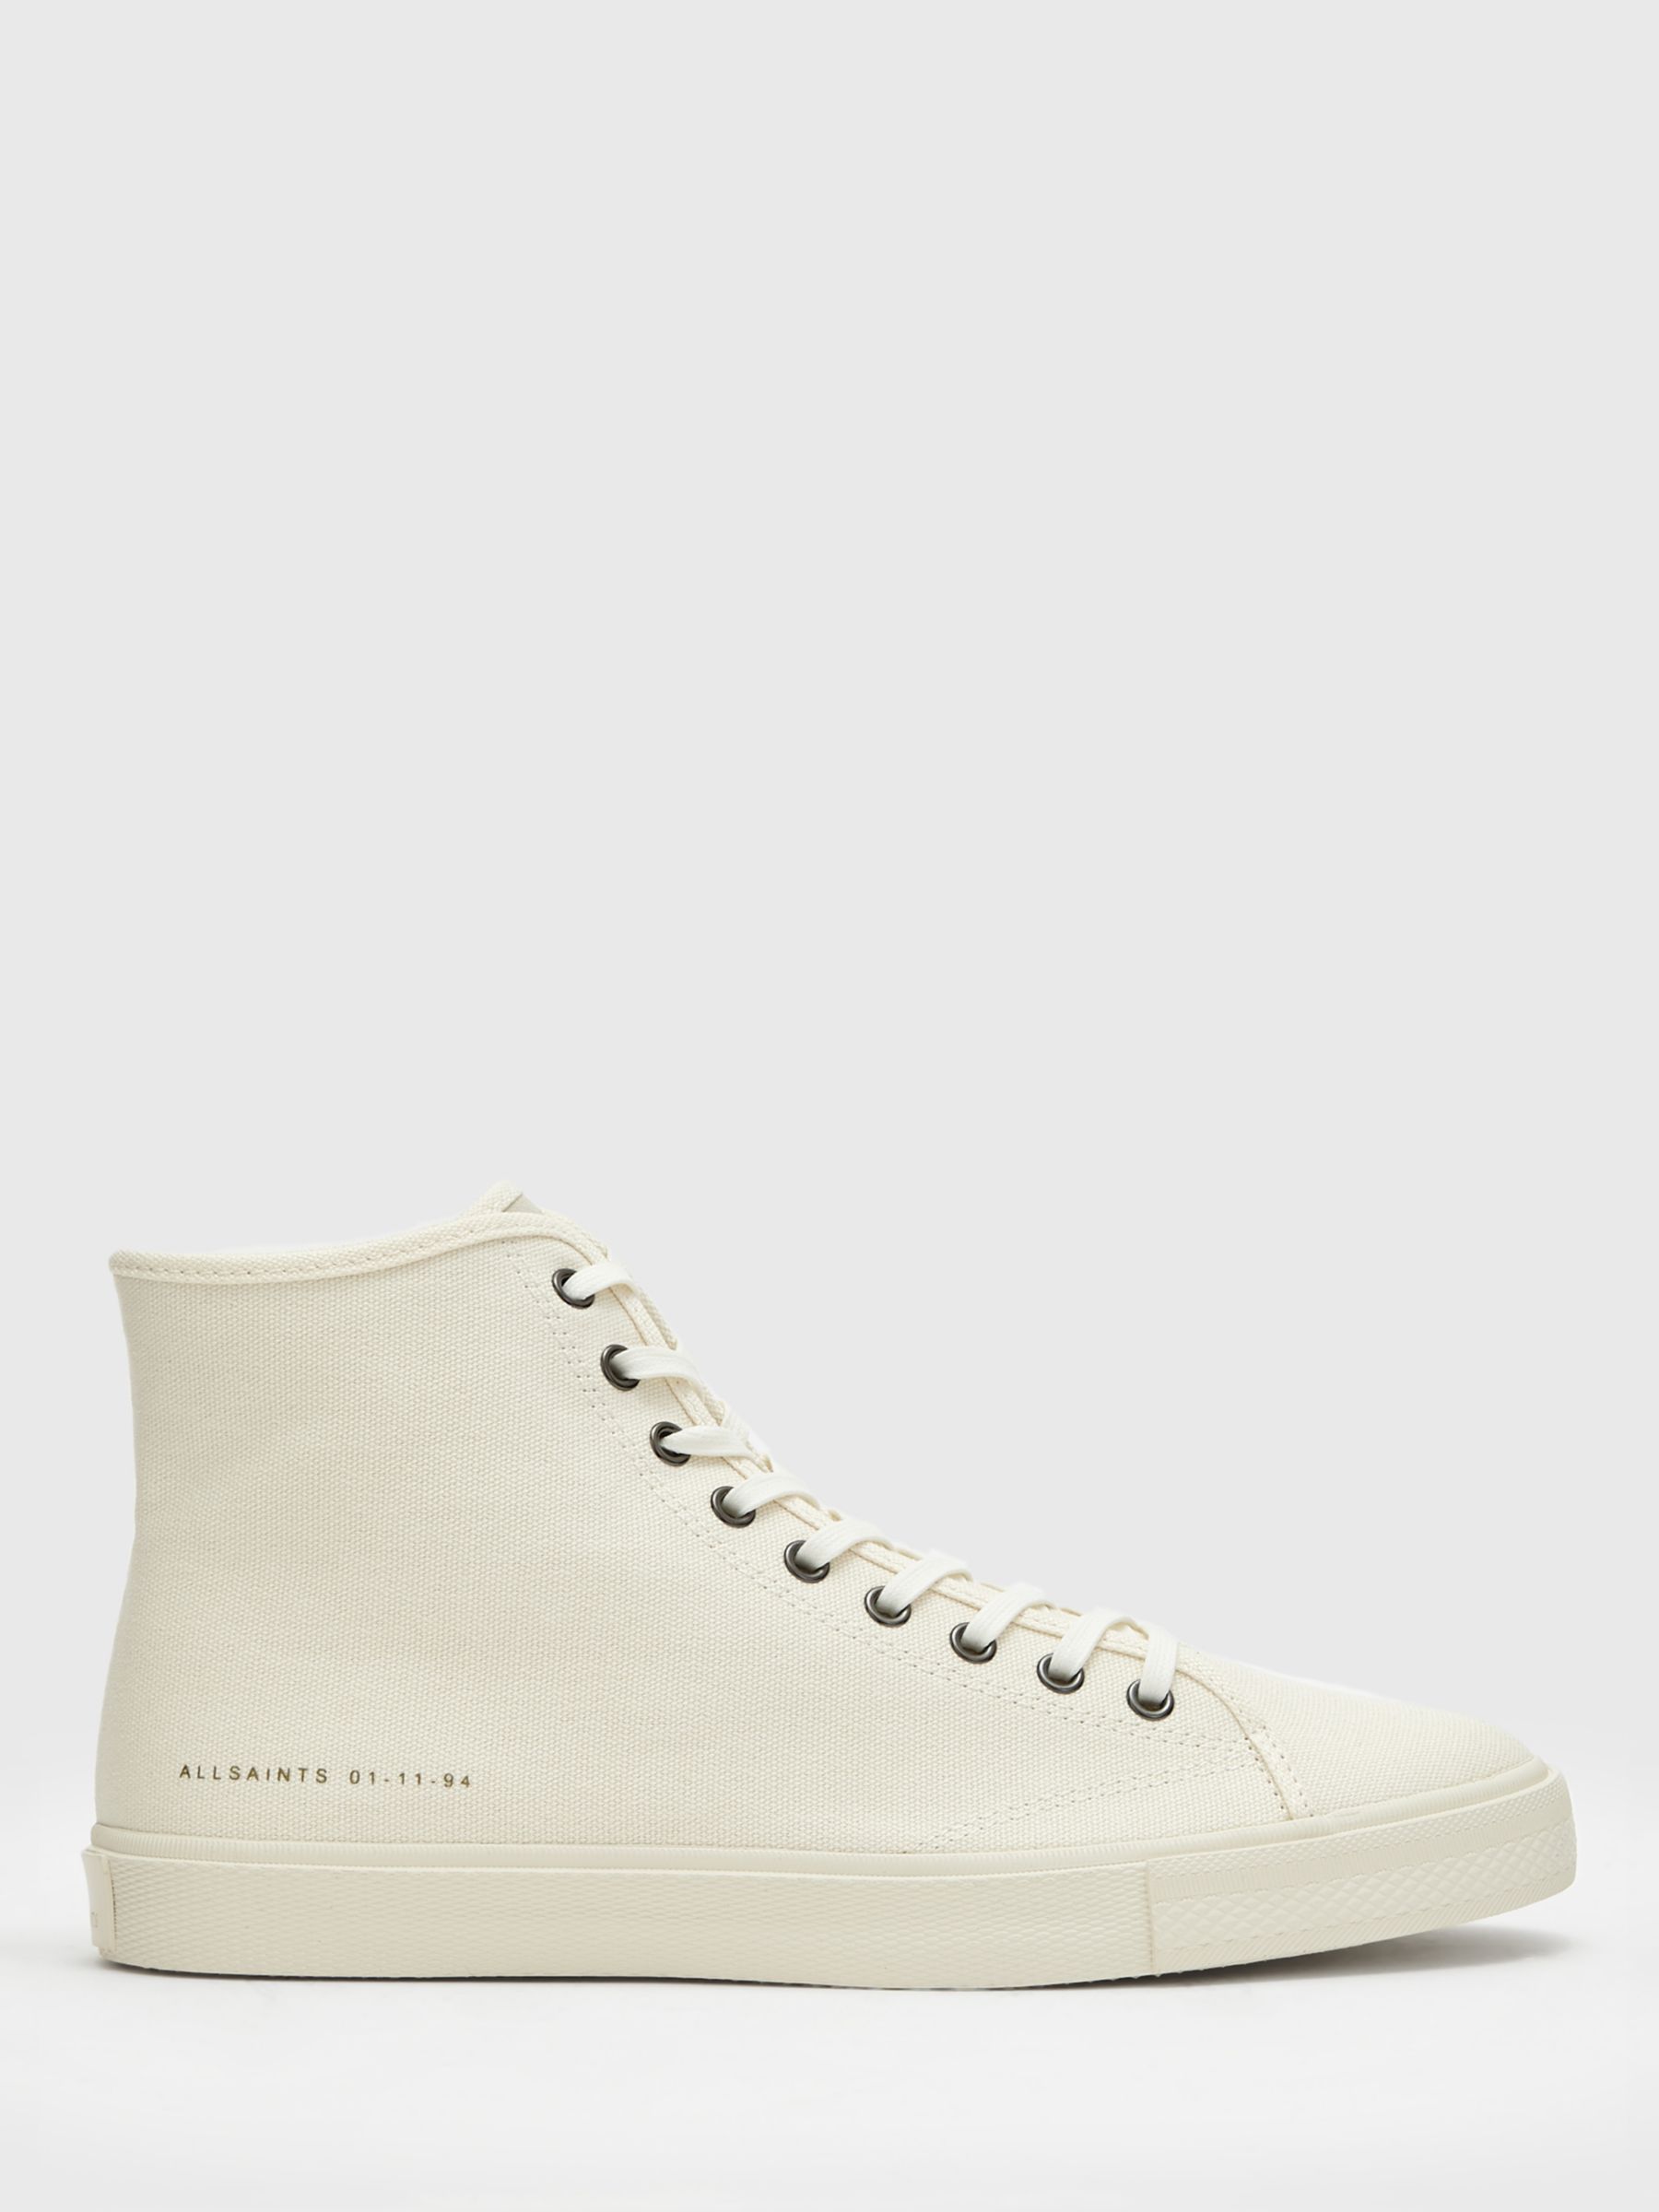 AllSaints Bryce Canvas High Top Trainers, Off White at John Lewis ...